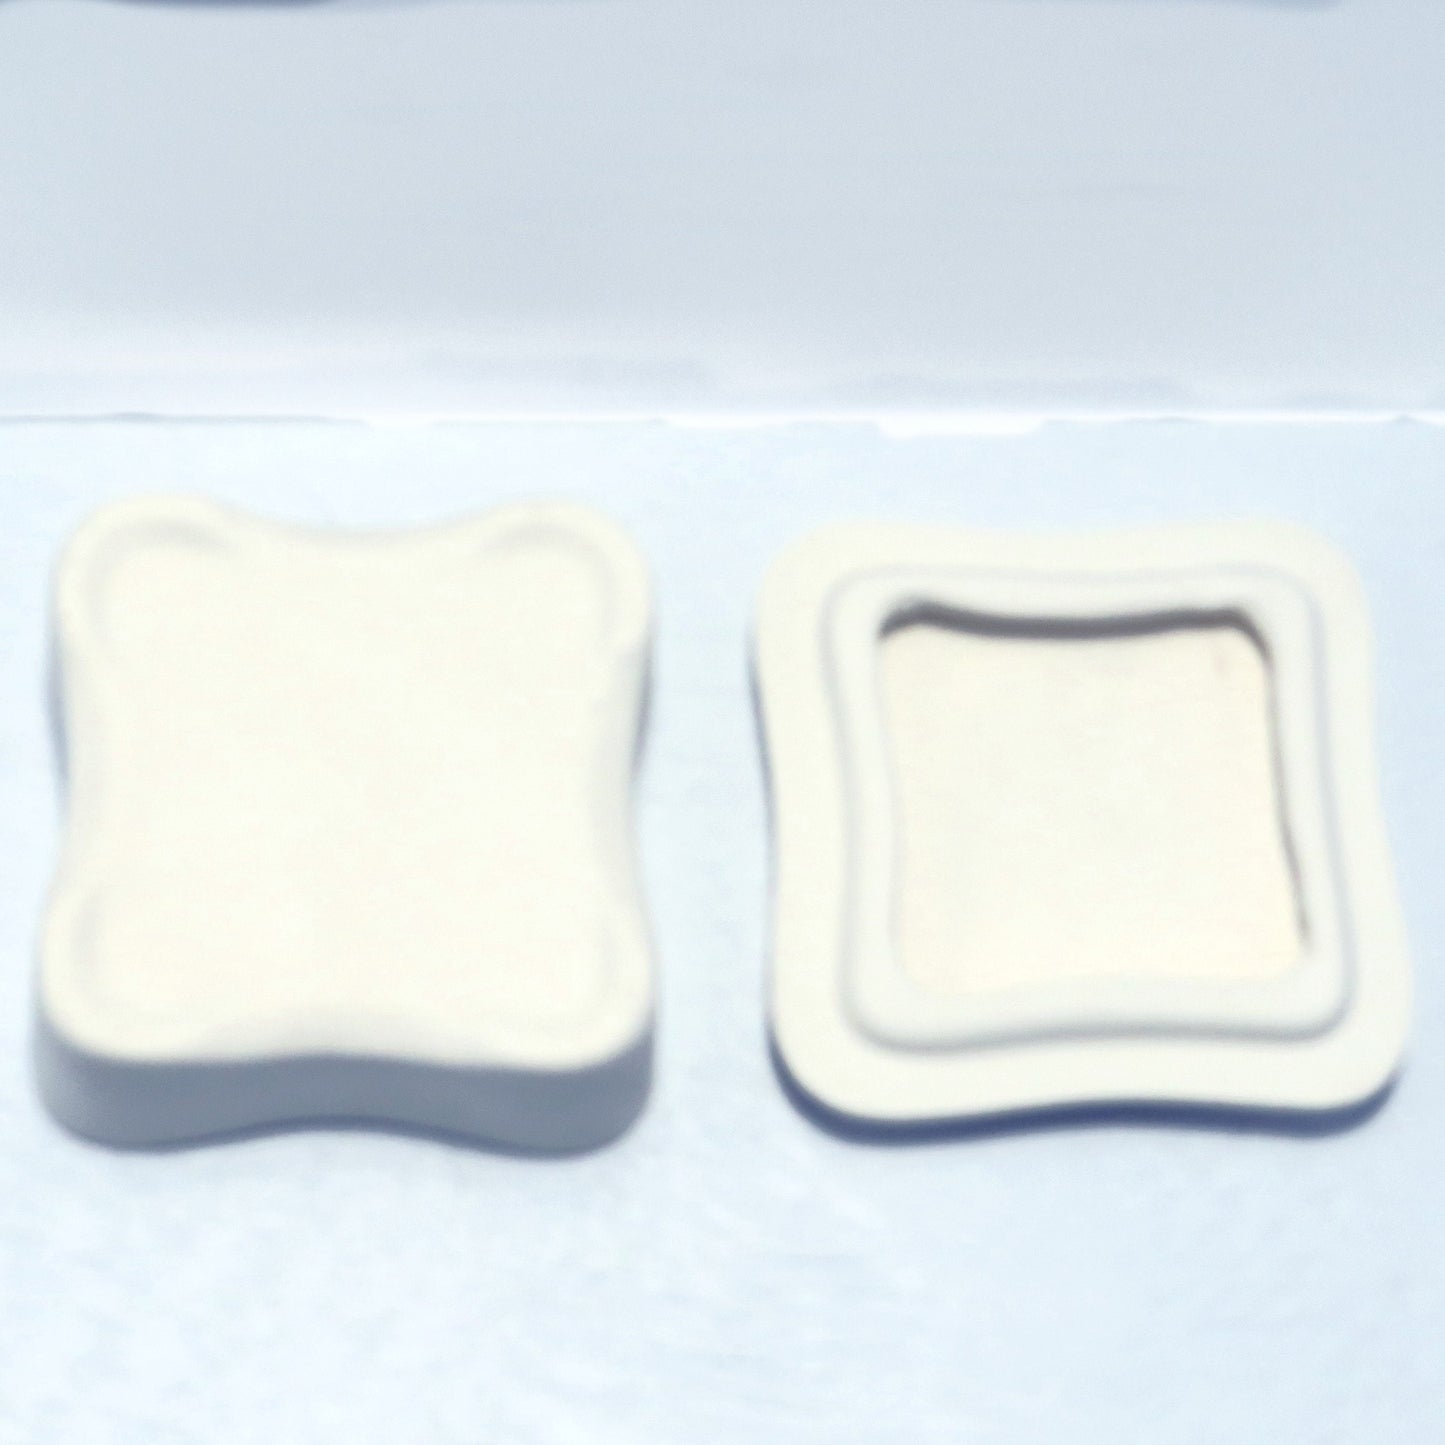 Handmade Ready to Paint Square Trinket Dish with Lid / Ceramics To Paint / Paintable Ceramic Jewelry Dish / Gift For Her / Paint it Yourself